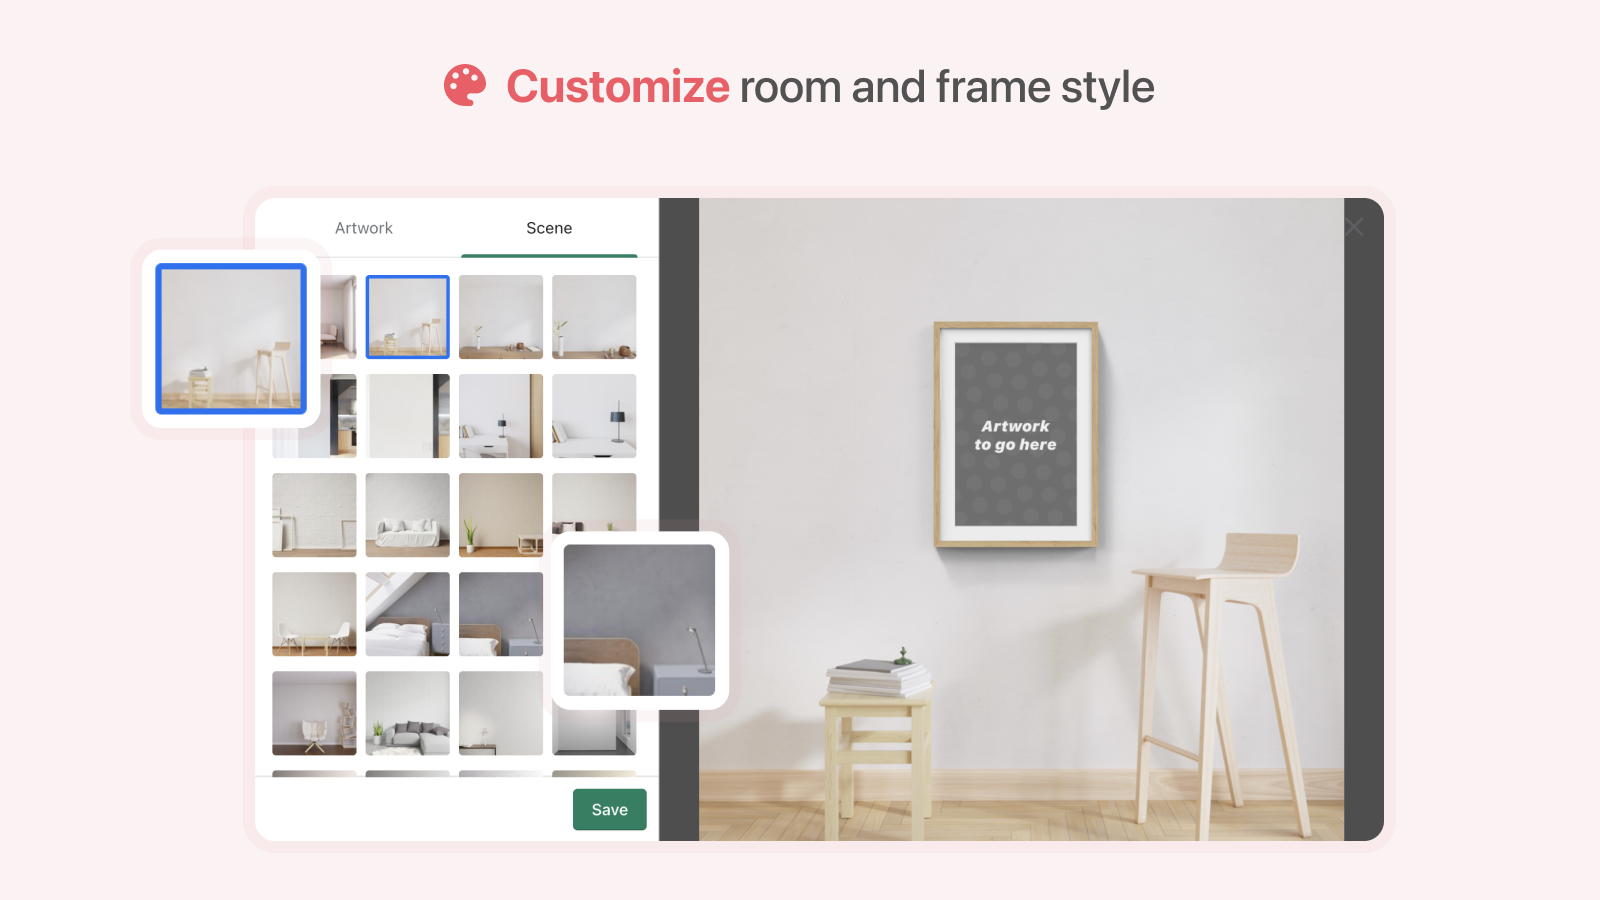 Customize room and frame style